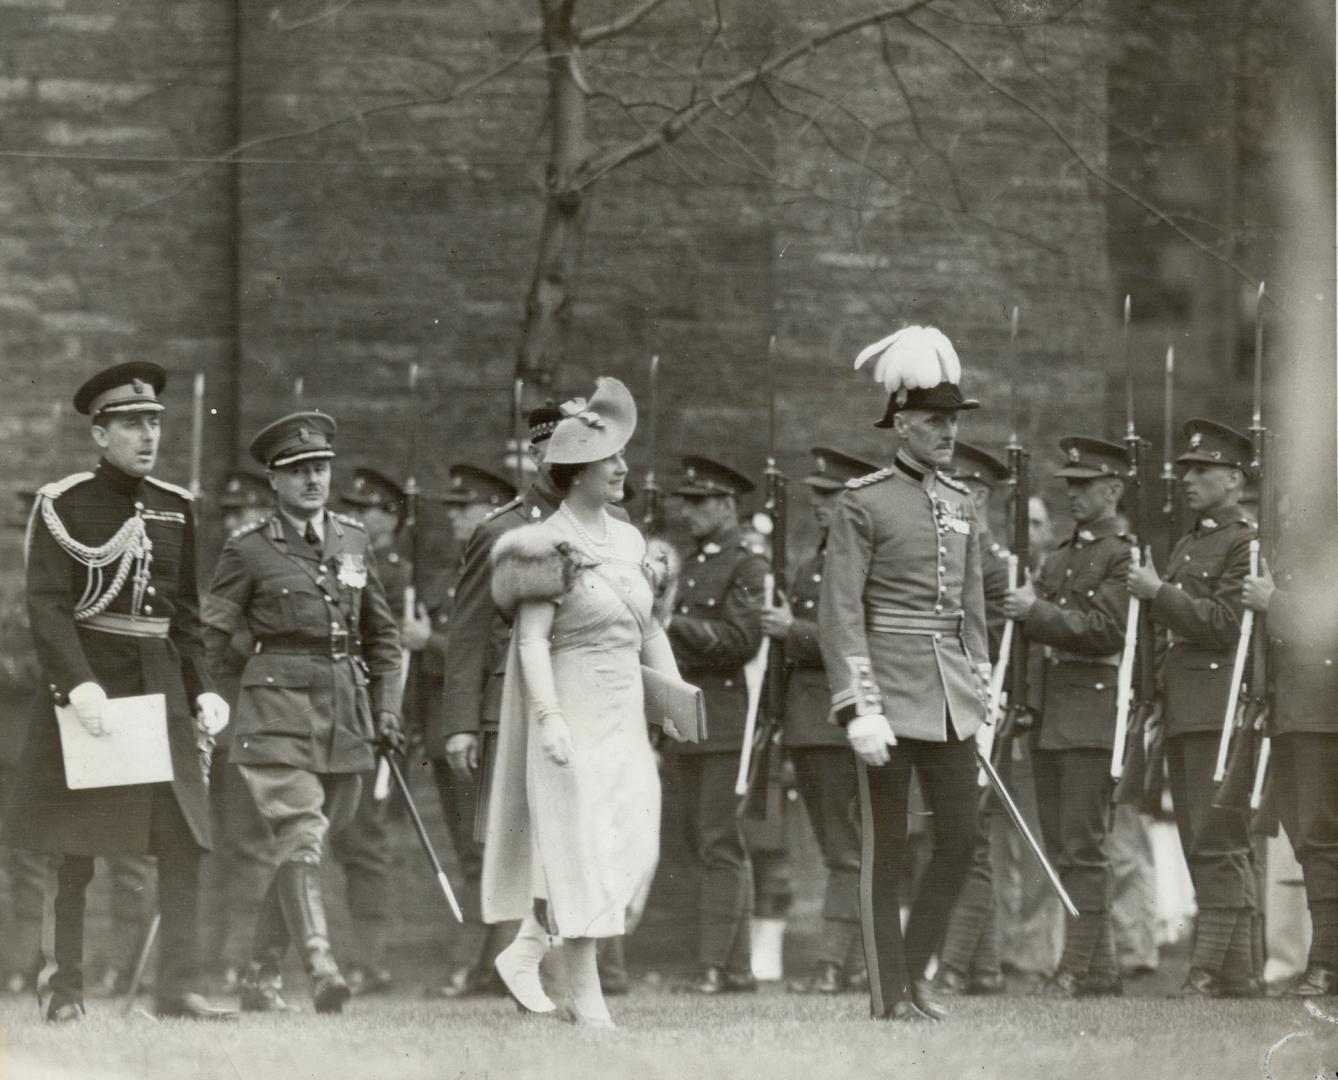 Escorted by brigadier R. O. Alexander, the Queen goes to present colors to her regiment, Toronto Scottish